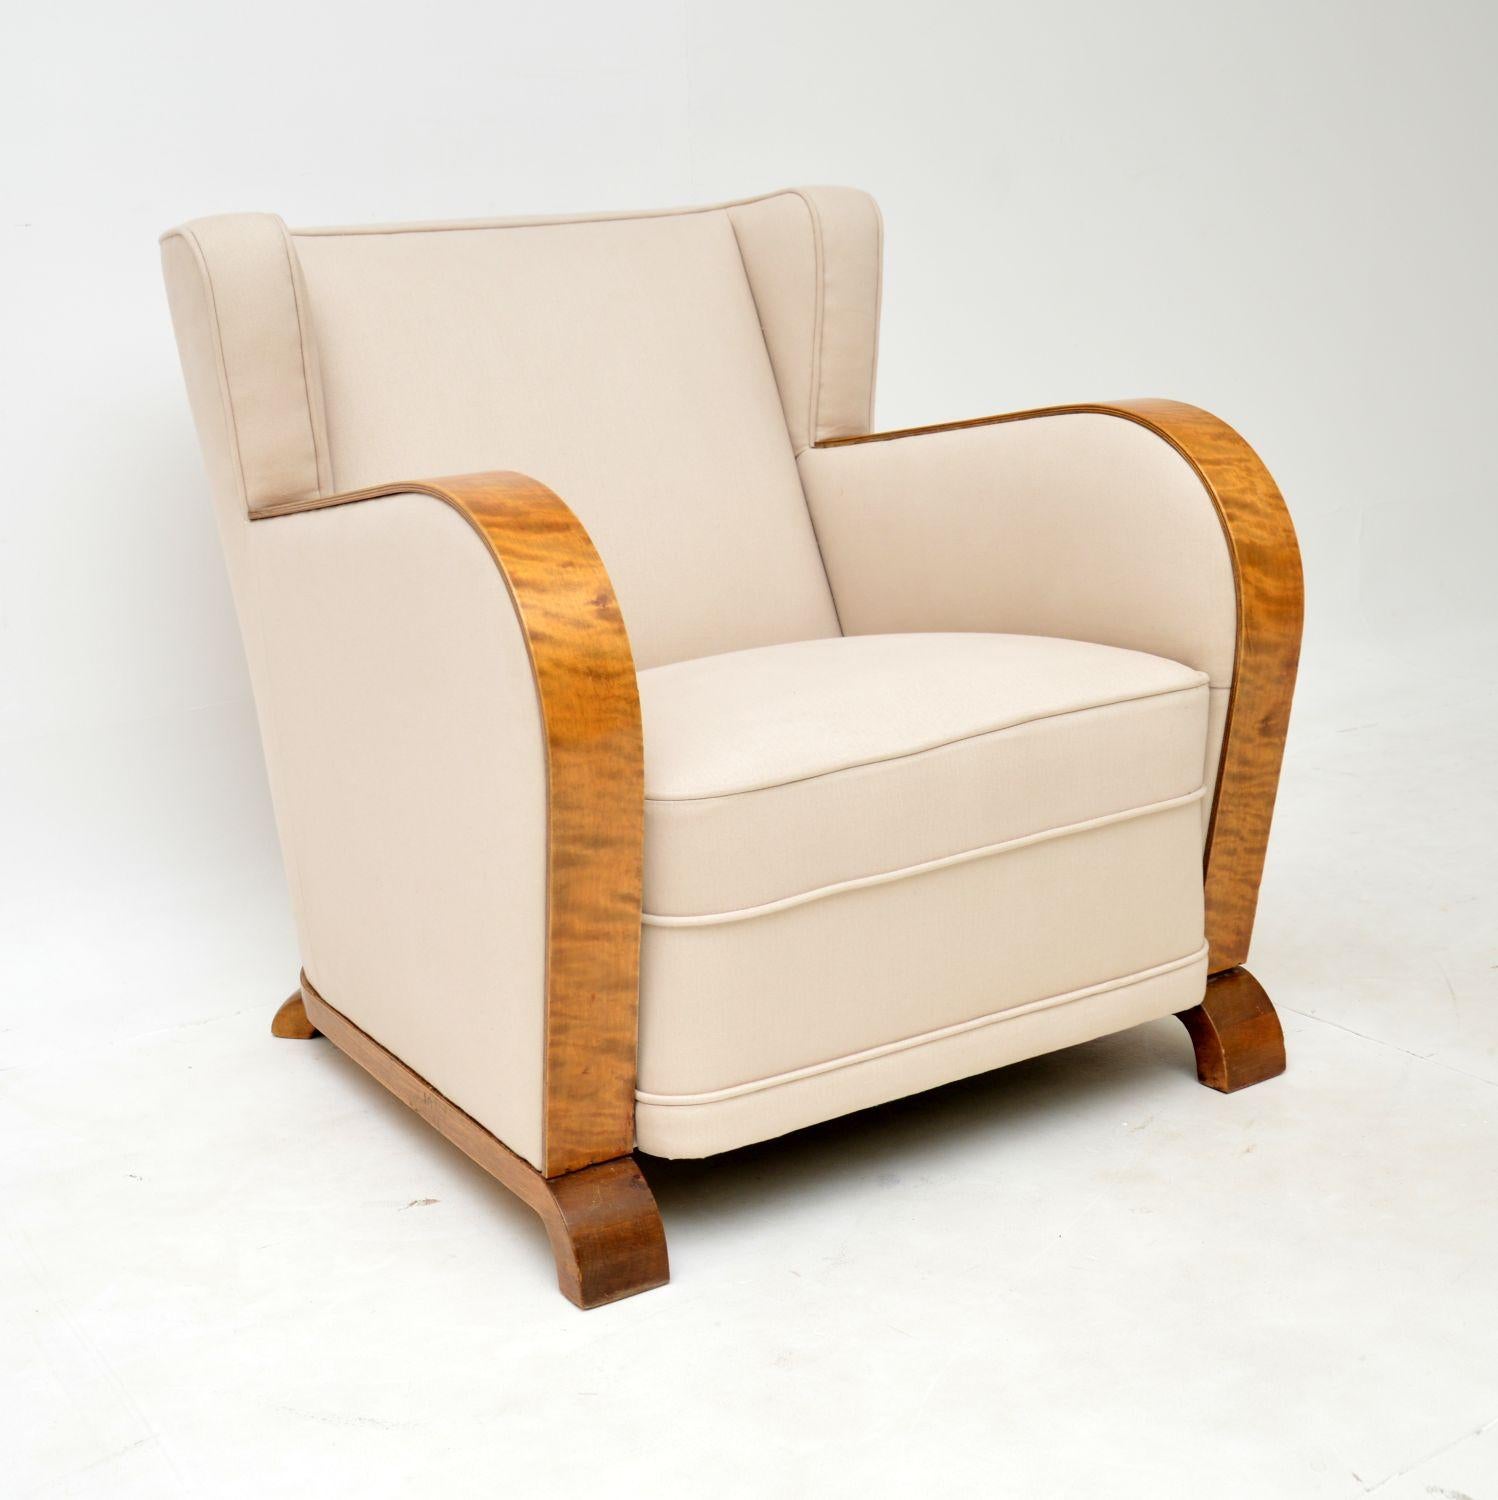 Early 20th Century 1920's Pair of Finnish Art Deco Satin Birch Armchairs For Sale